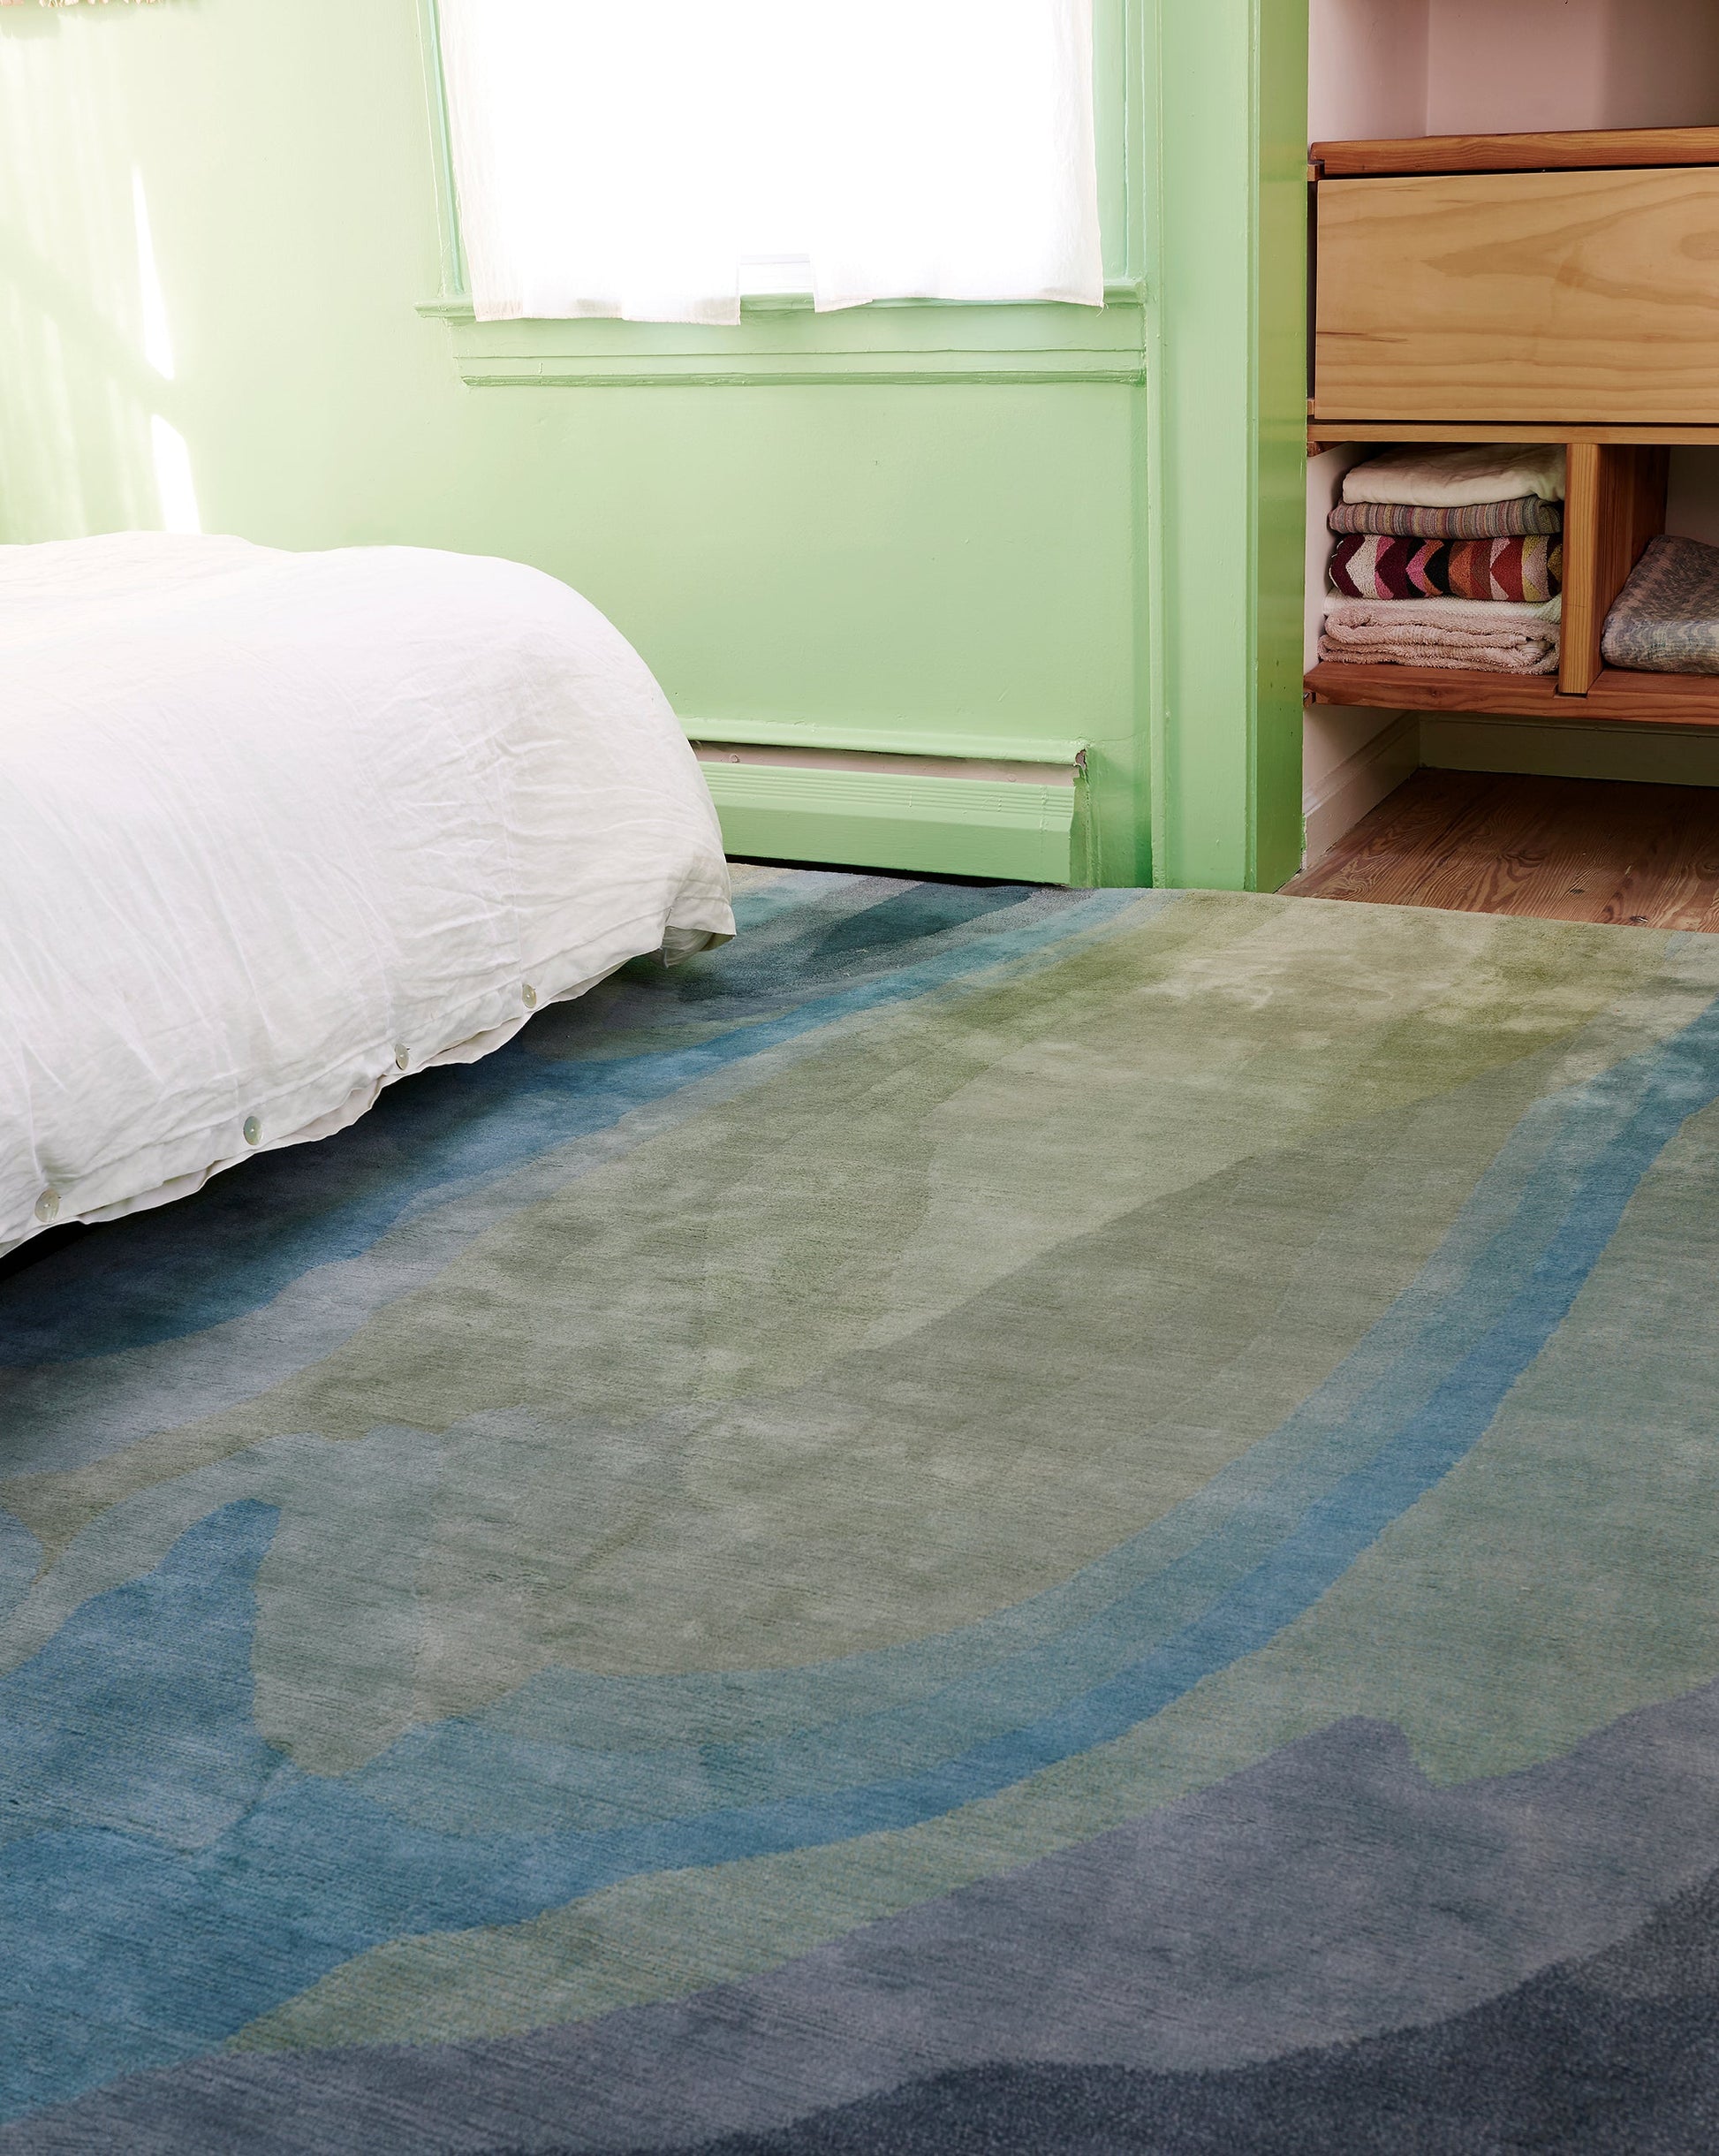 A green bedroom with a Progressions Hand Knotted Rug 5' x 8' in the Thalassa colorway.